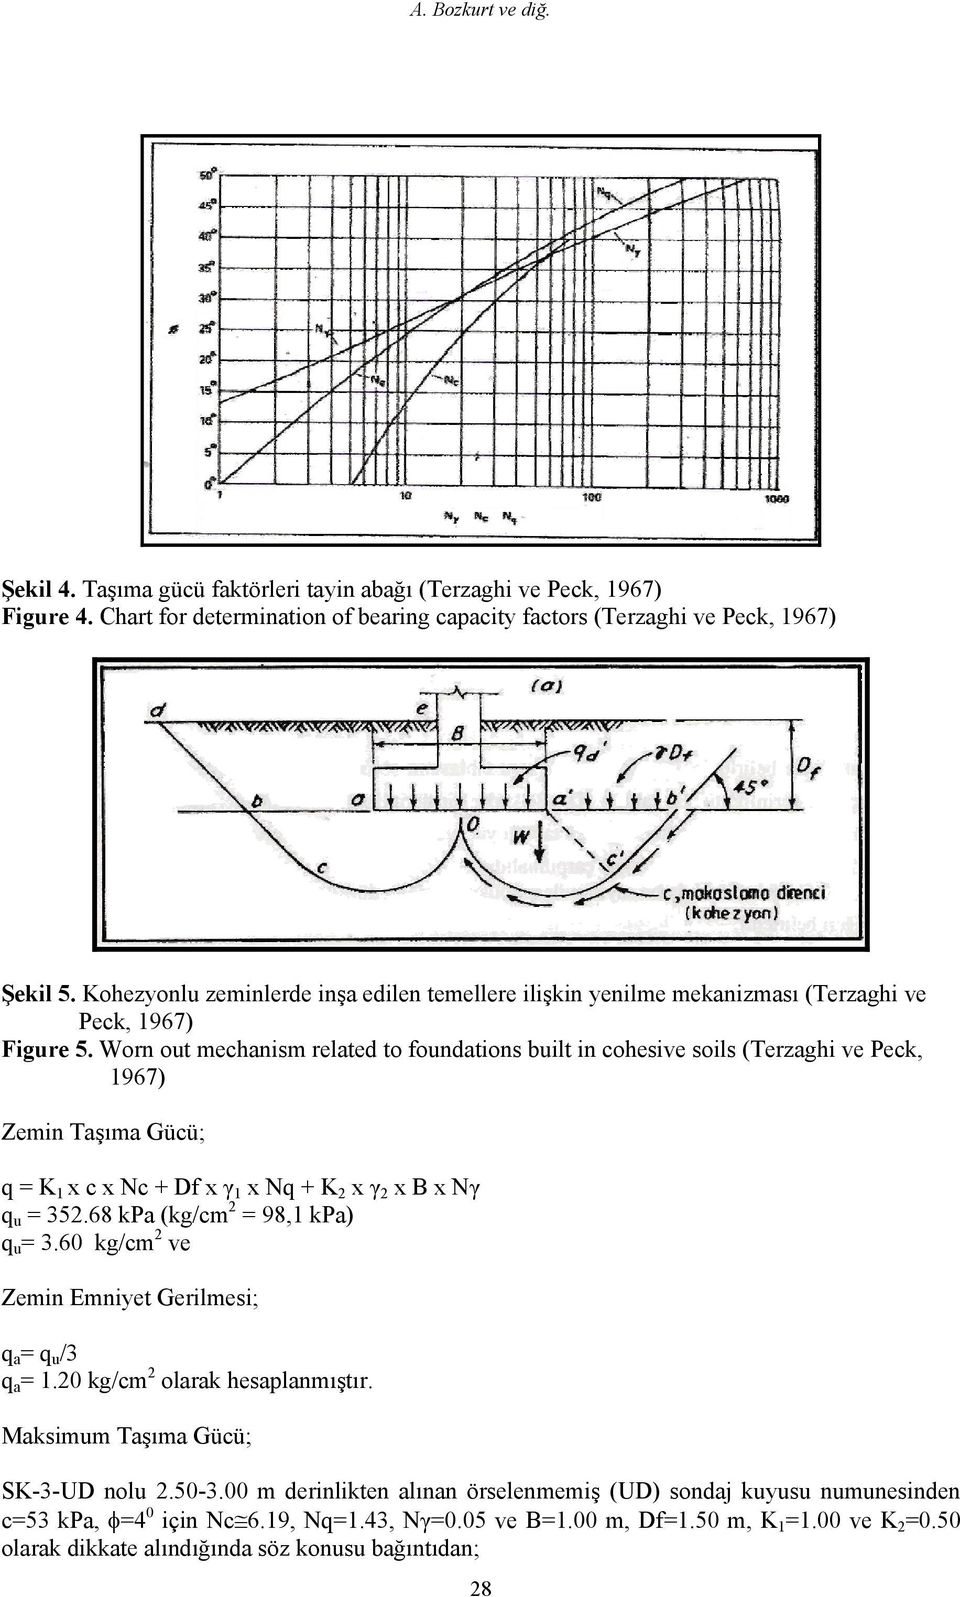 Worn out mechanism related to foundations built in cohesive soils (Terzaghi ve Peck, 1967) Zemin Taşıma Gücü; q = K 1 x c x Nc + Df x γ 1 x Nq + K 2 x γ 2 x B x Nγ q u = 352.